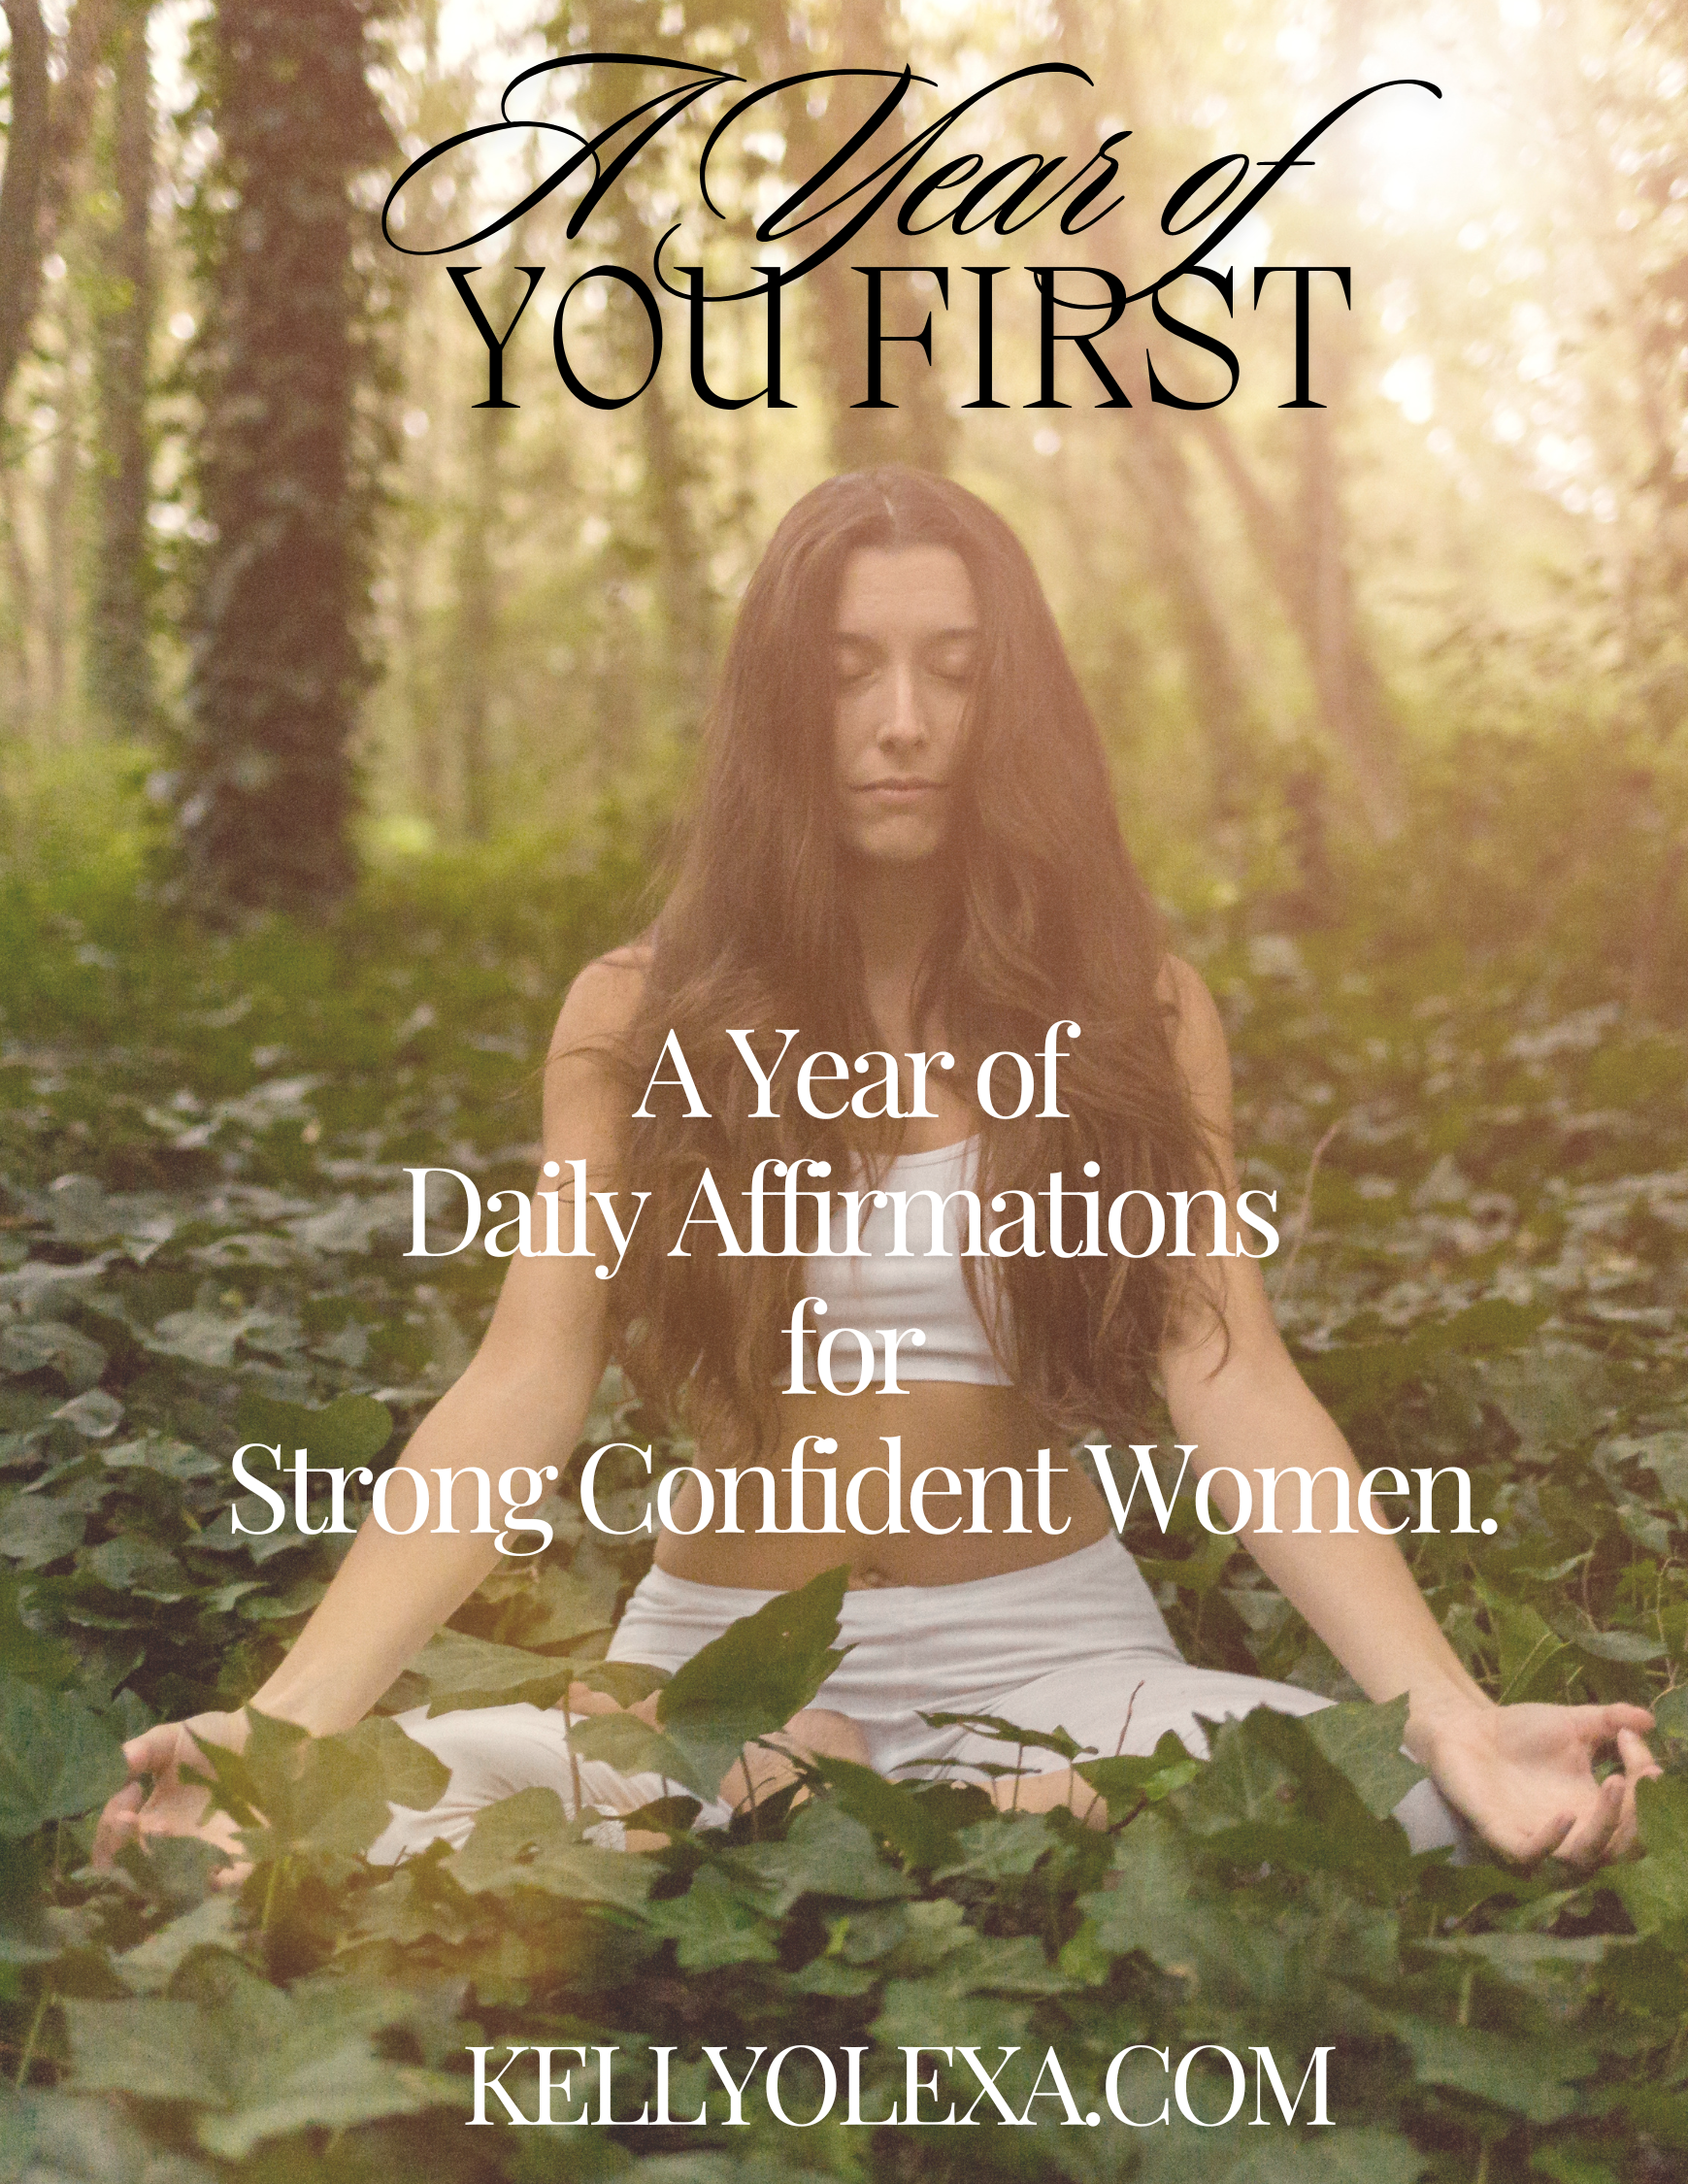 A YEAR OF YOU FIRST DAILY AFFIRMATIONS